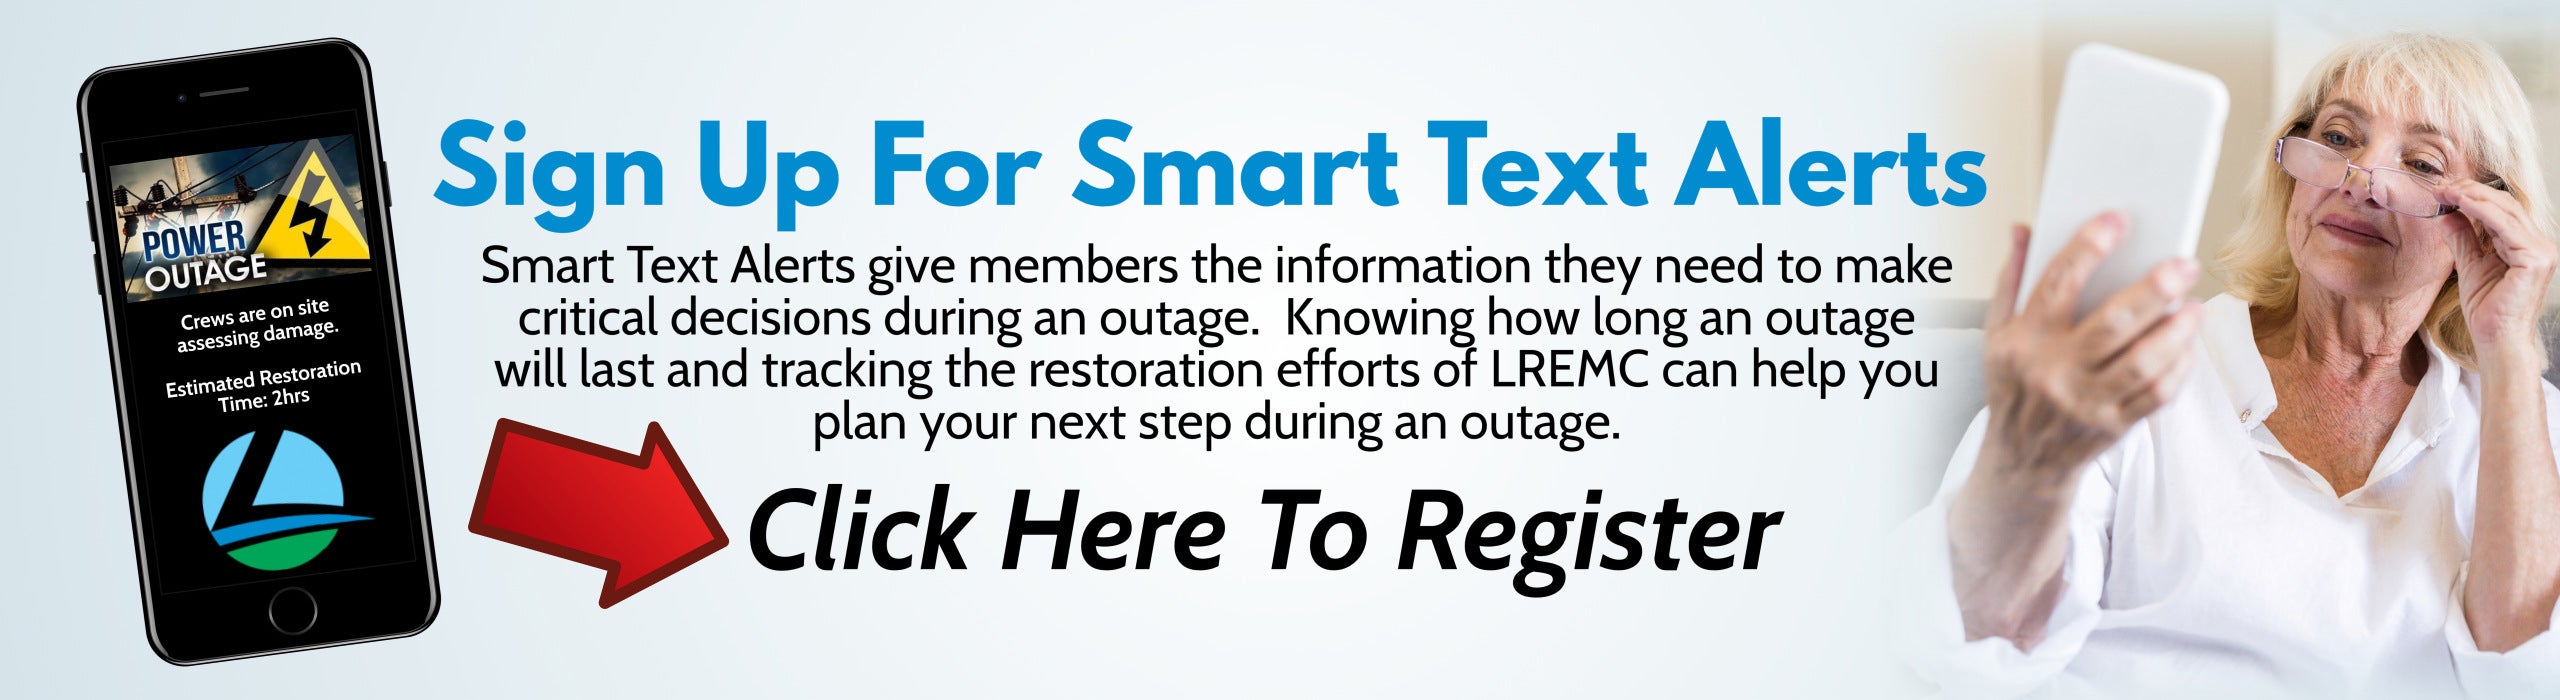 Sign up for Smart Text Alerts